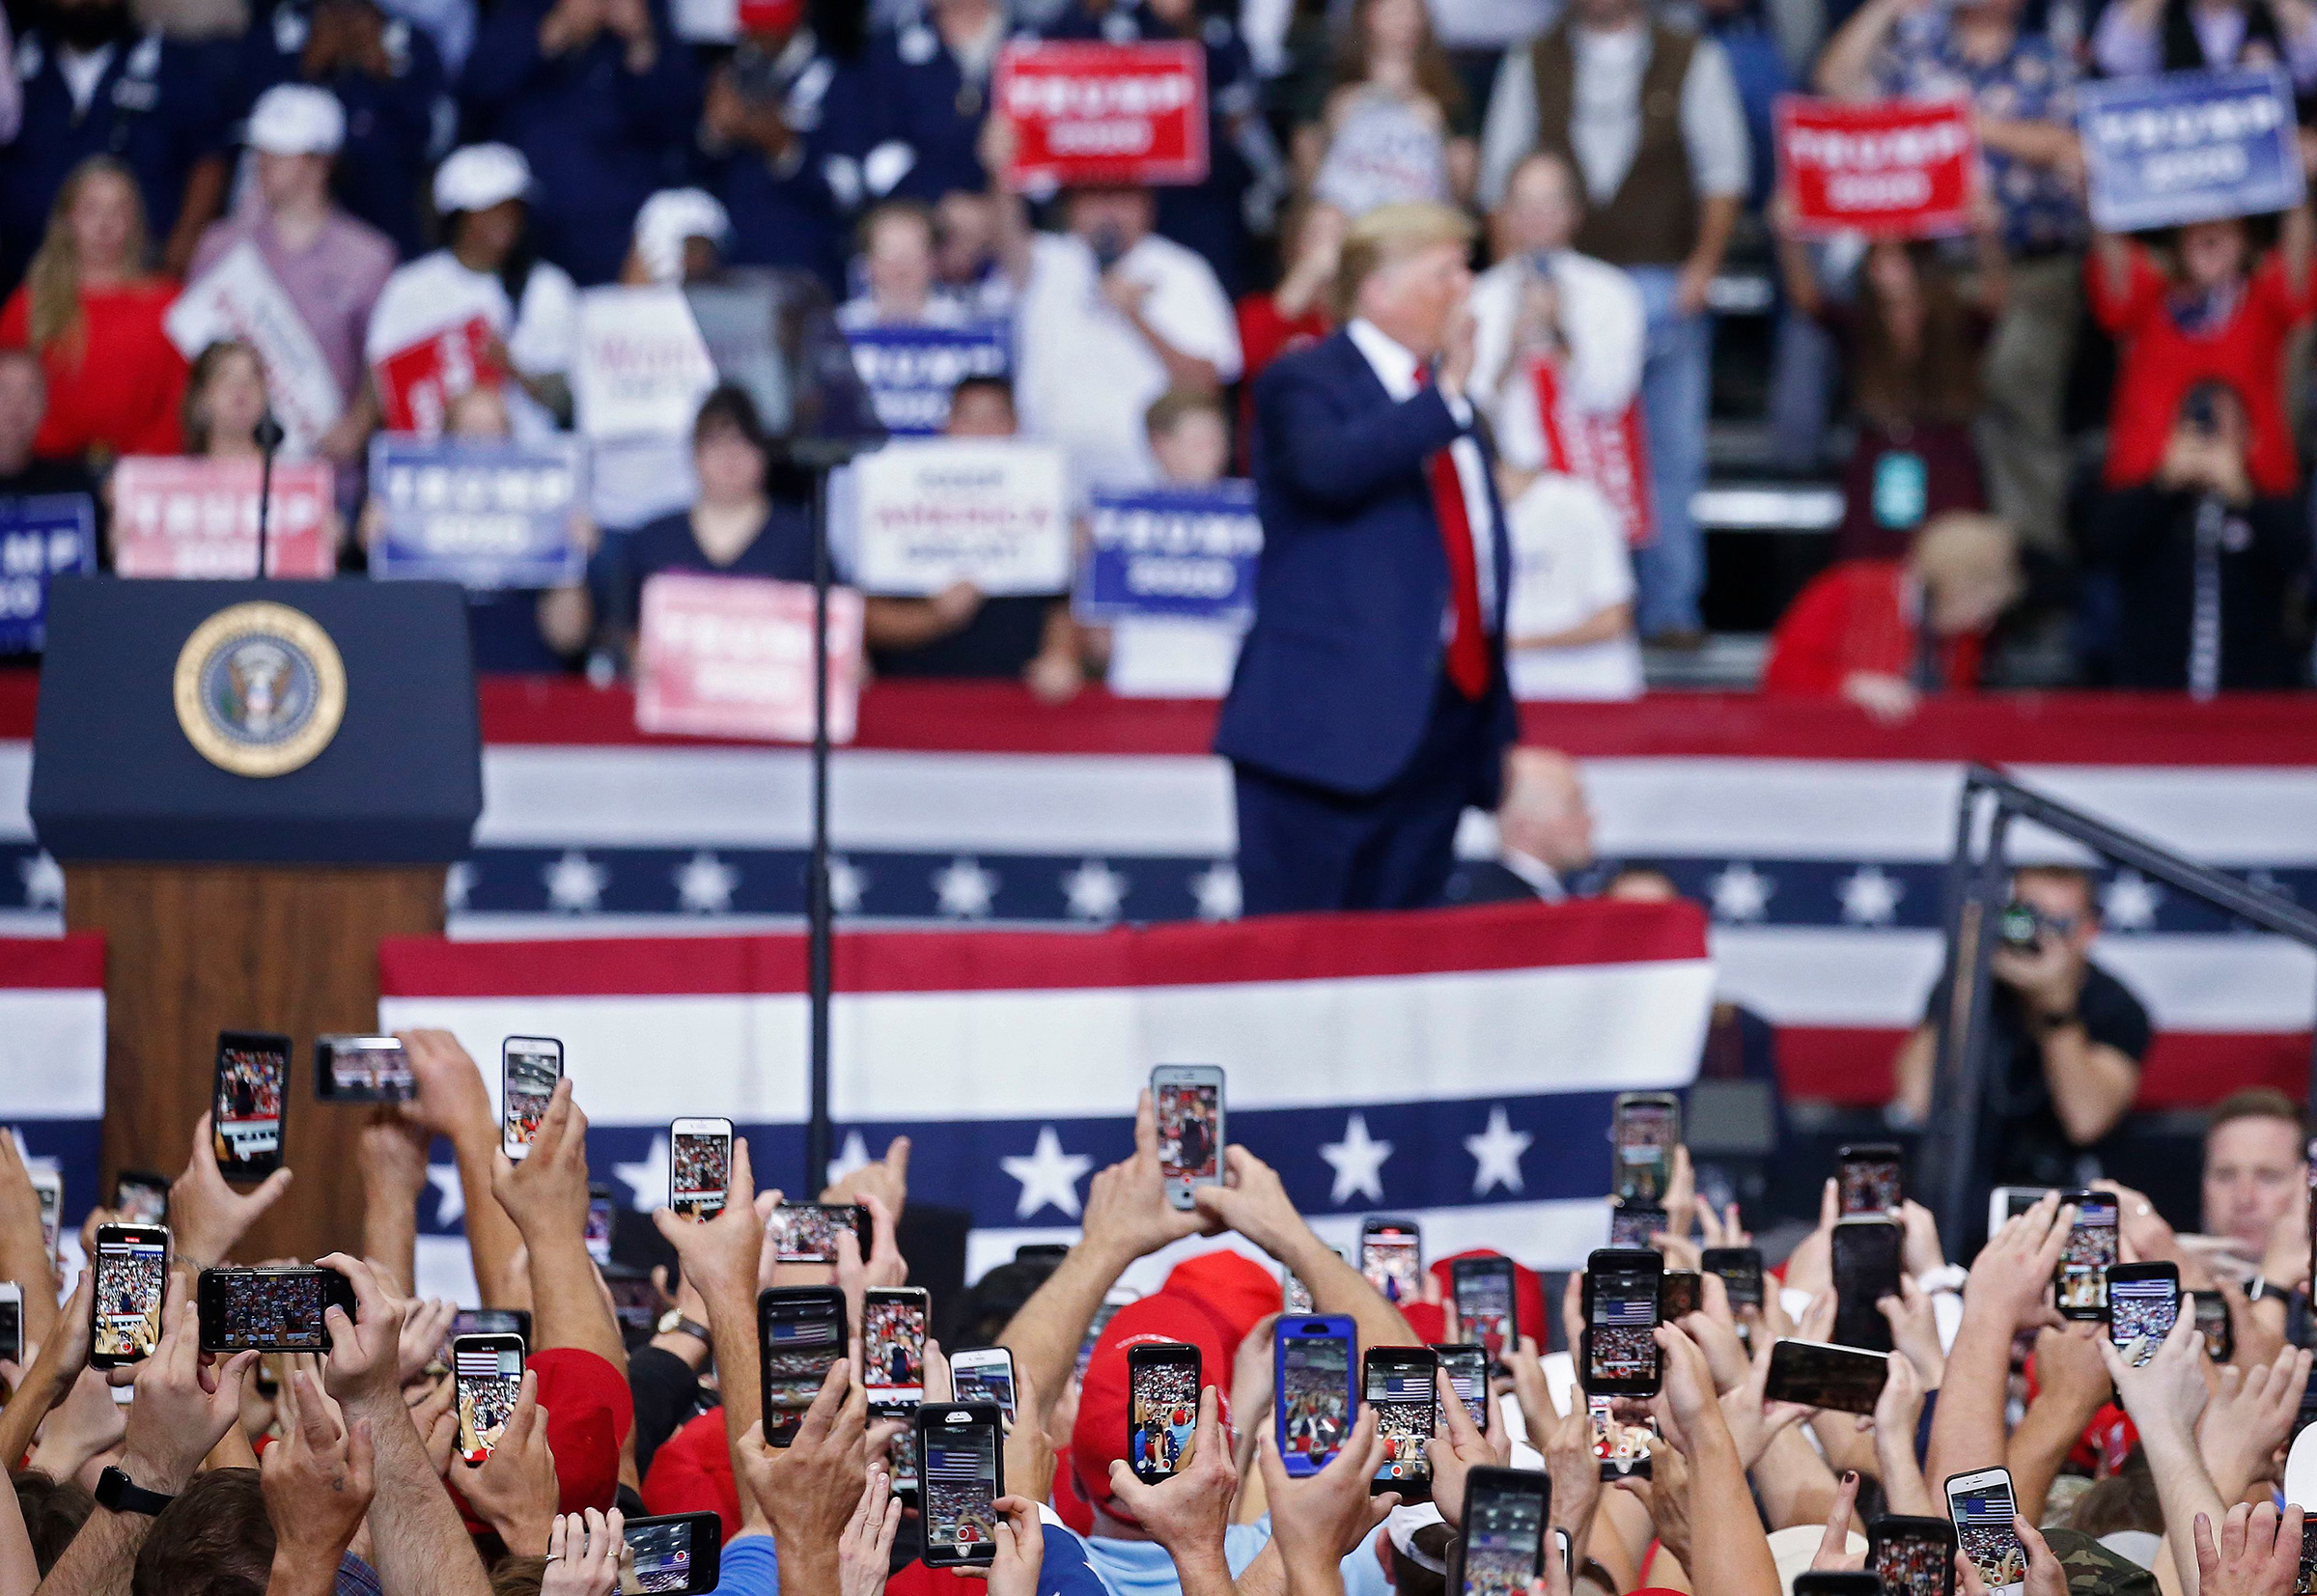 People use their phones to photograph President Donald Trump as he addresses a rally in Monroe, La., on Nov. 6 (Larry W. Smith—EPA-EFE/Shutterstock)